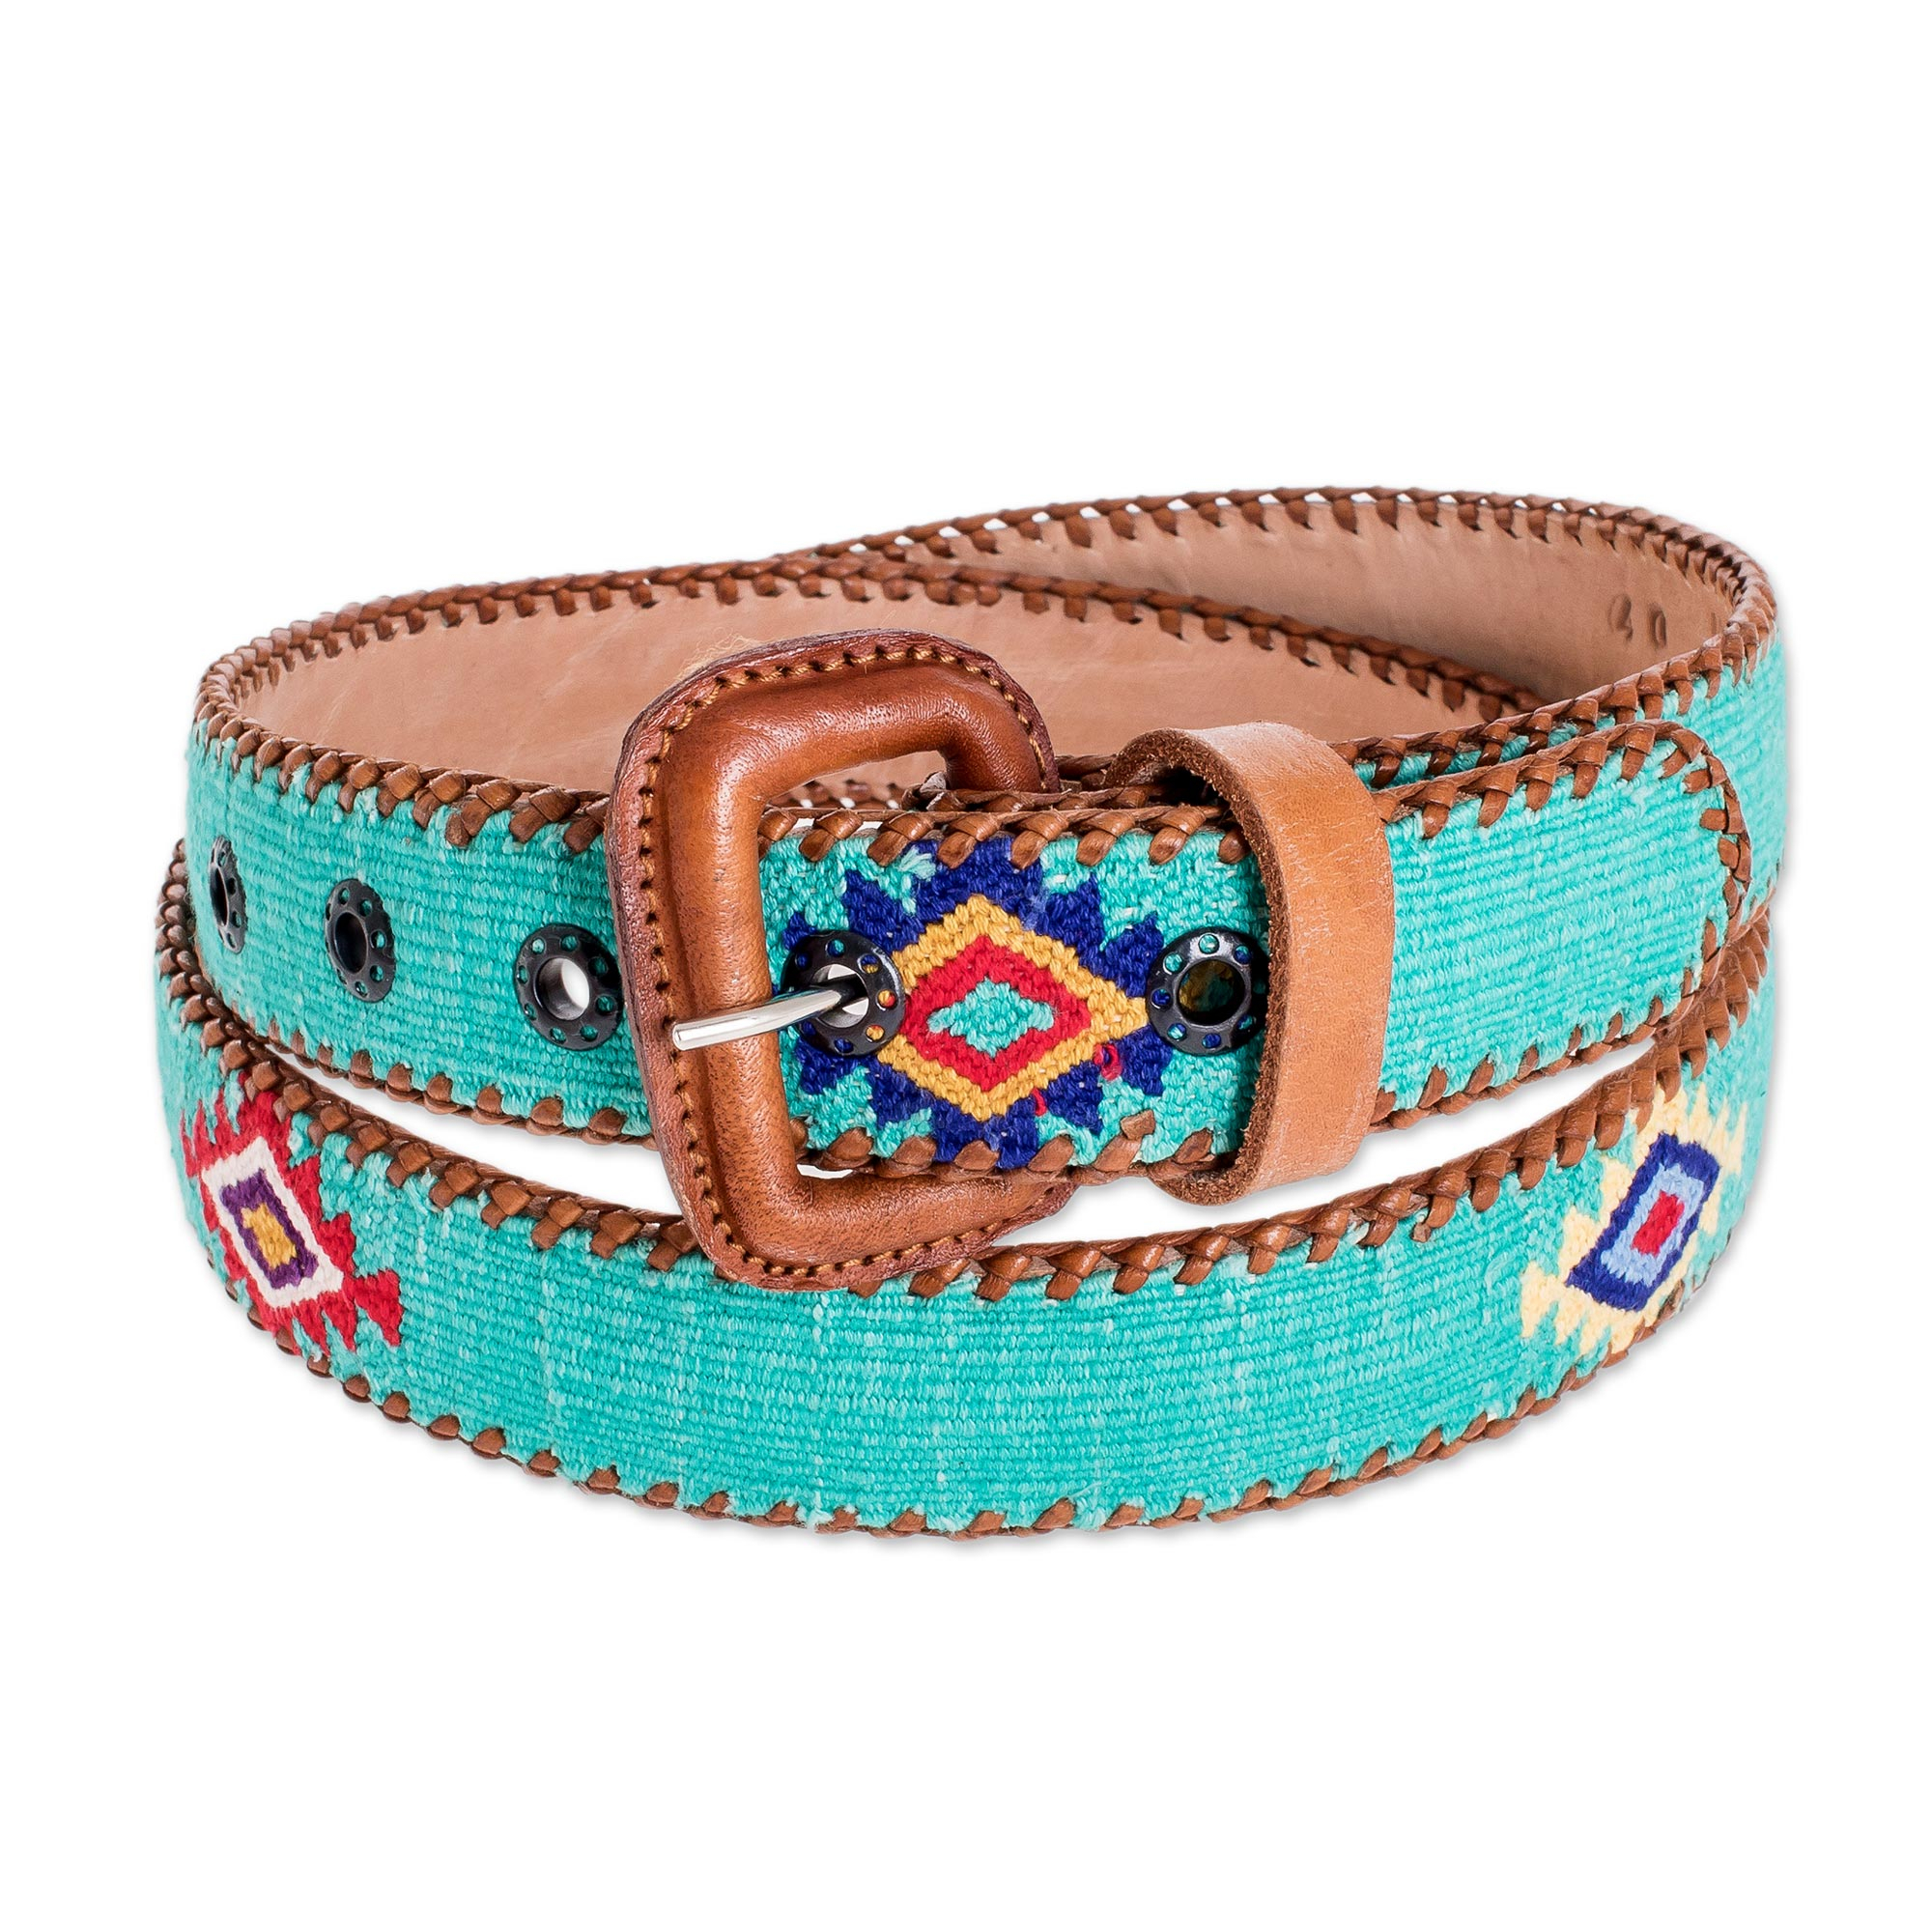 Hand Loomed Cotton and Leather Belt - Diamond Stars in Turquoise | NOVICA